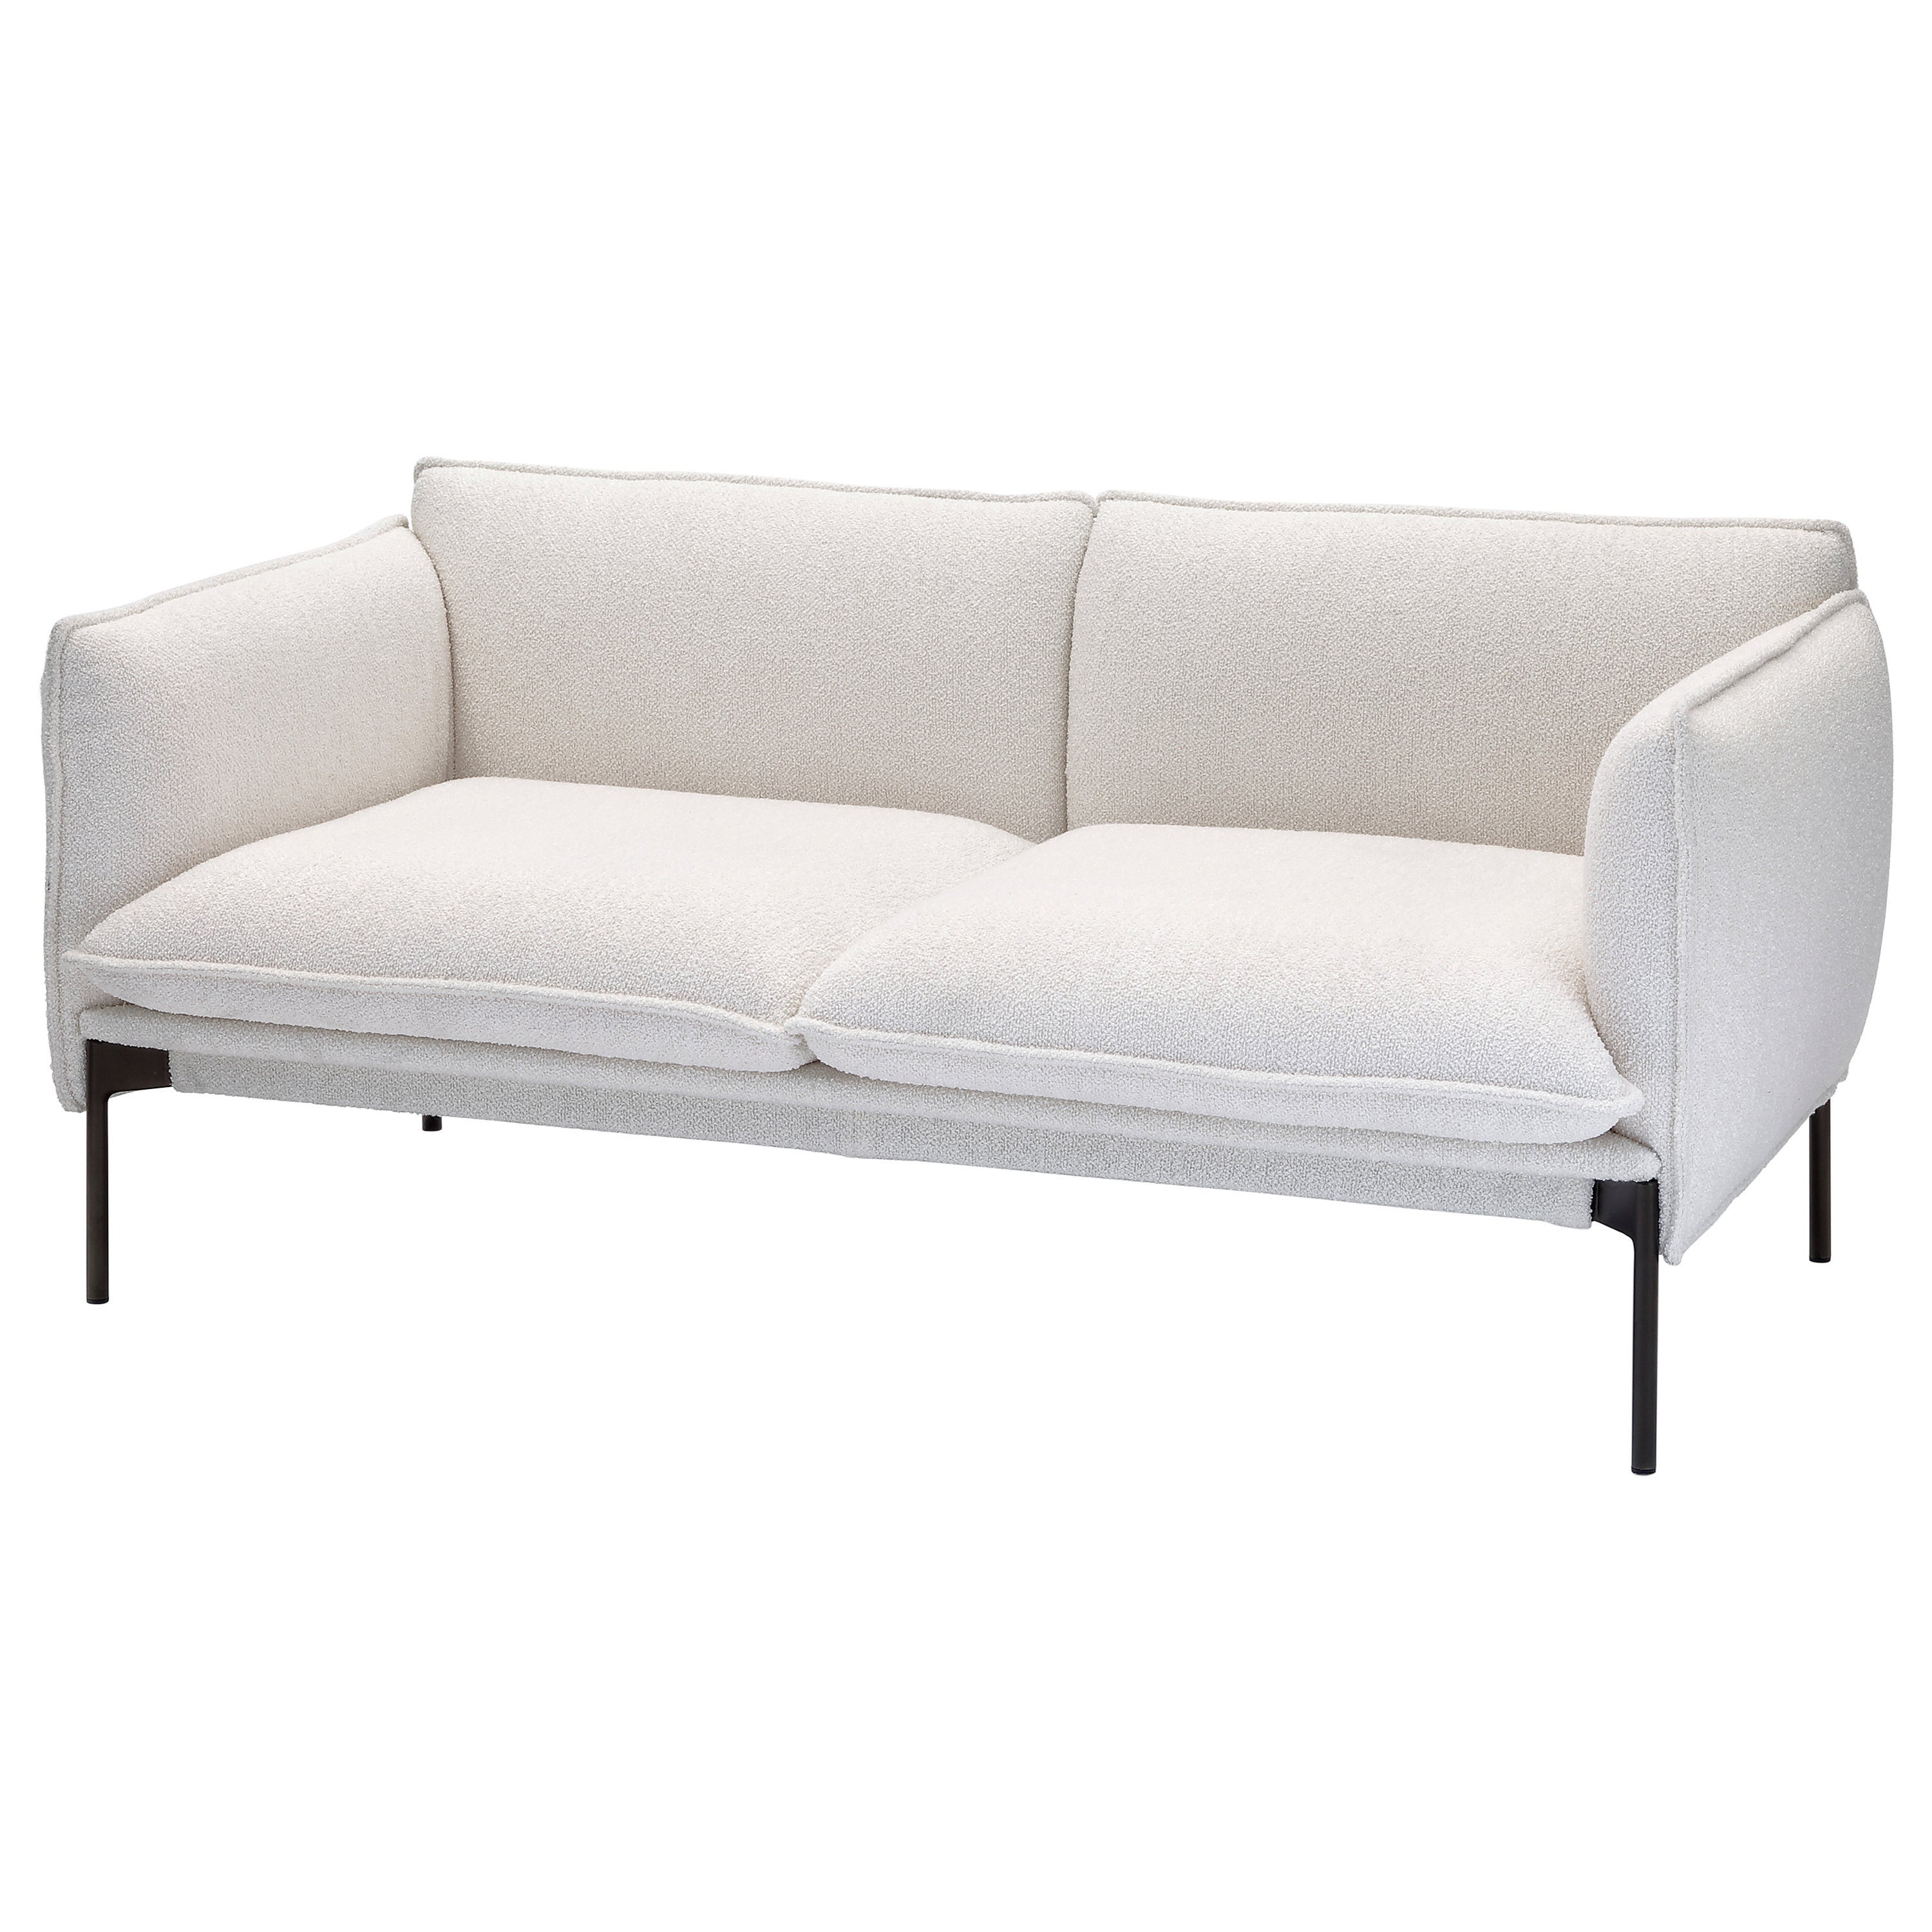 2 Seat Palm Springs Sofa by Anderssen & Voll For Sale